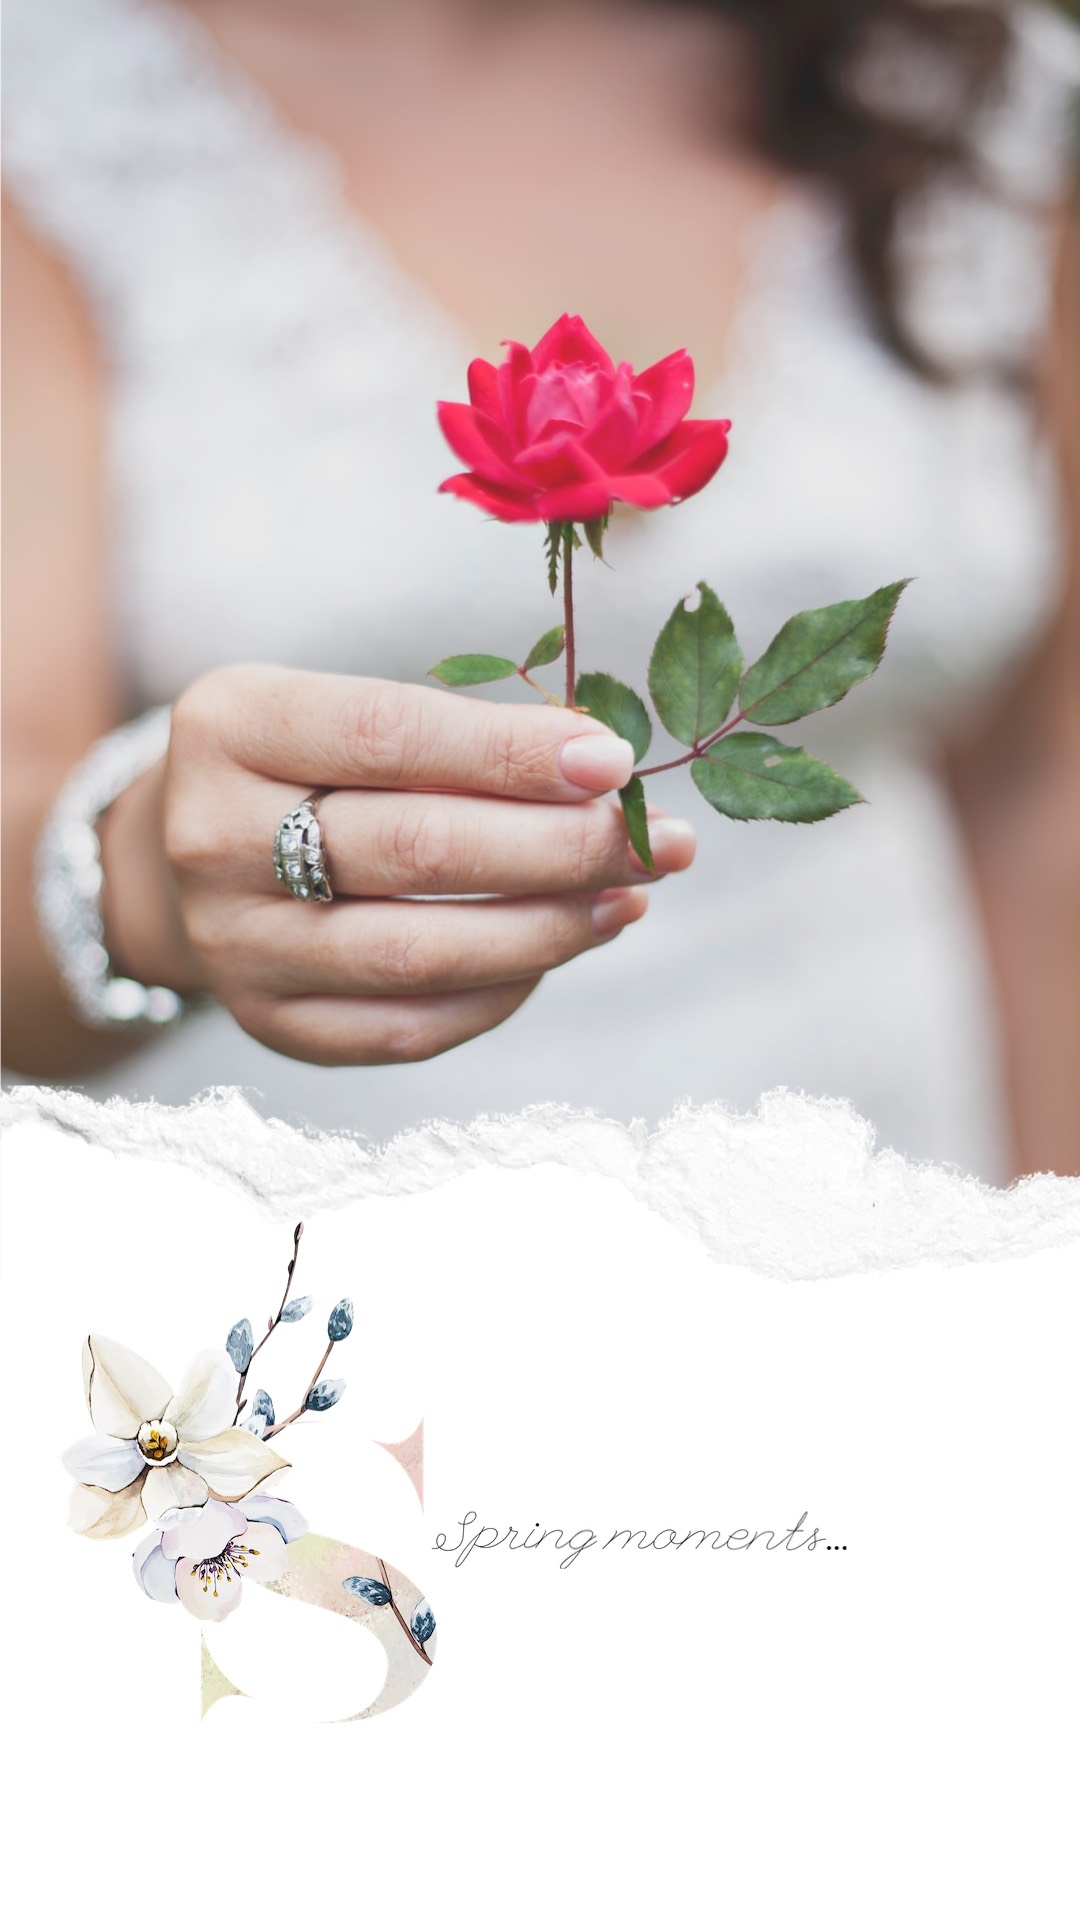 A Woman Holding A Red Rose In Her Hand Spring Story Template